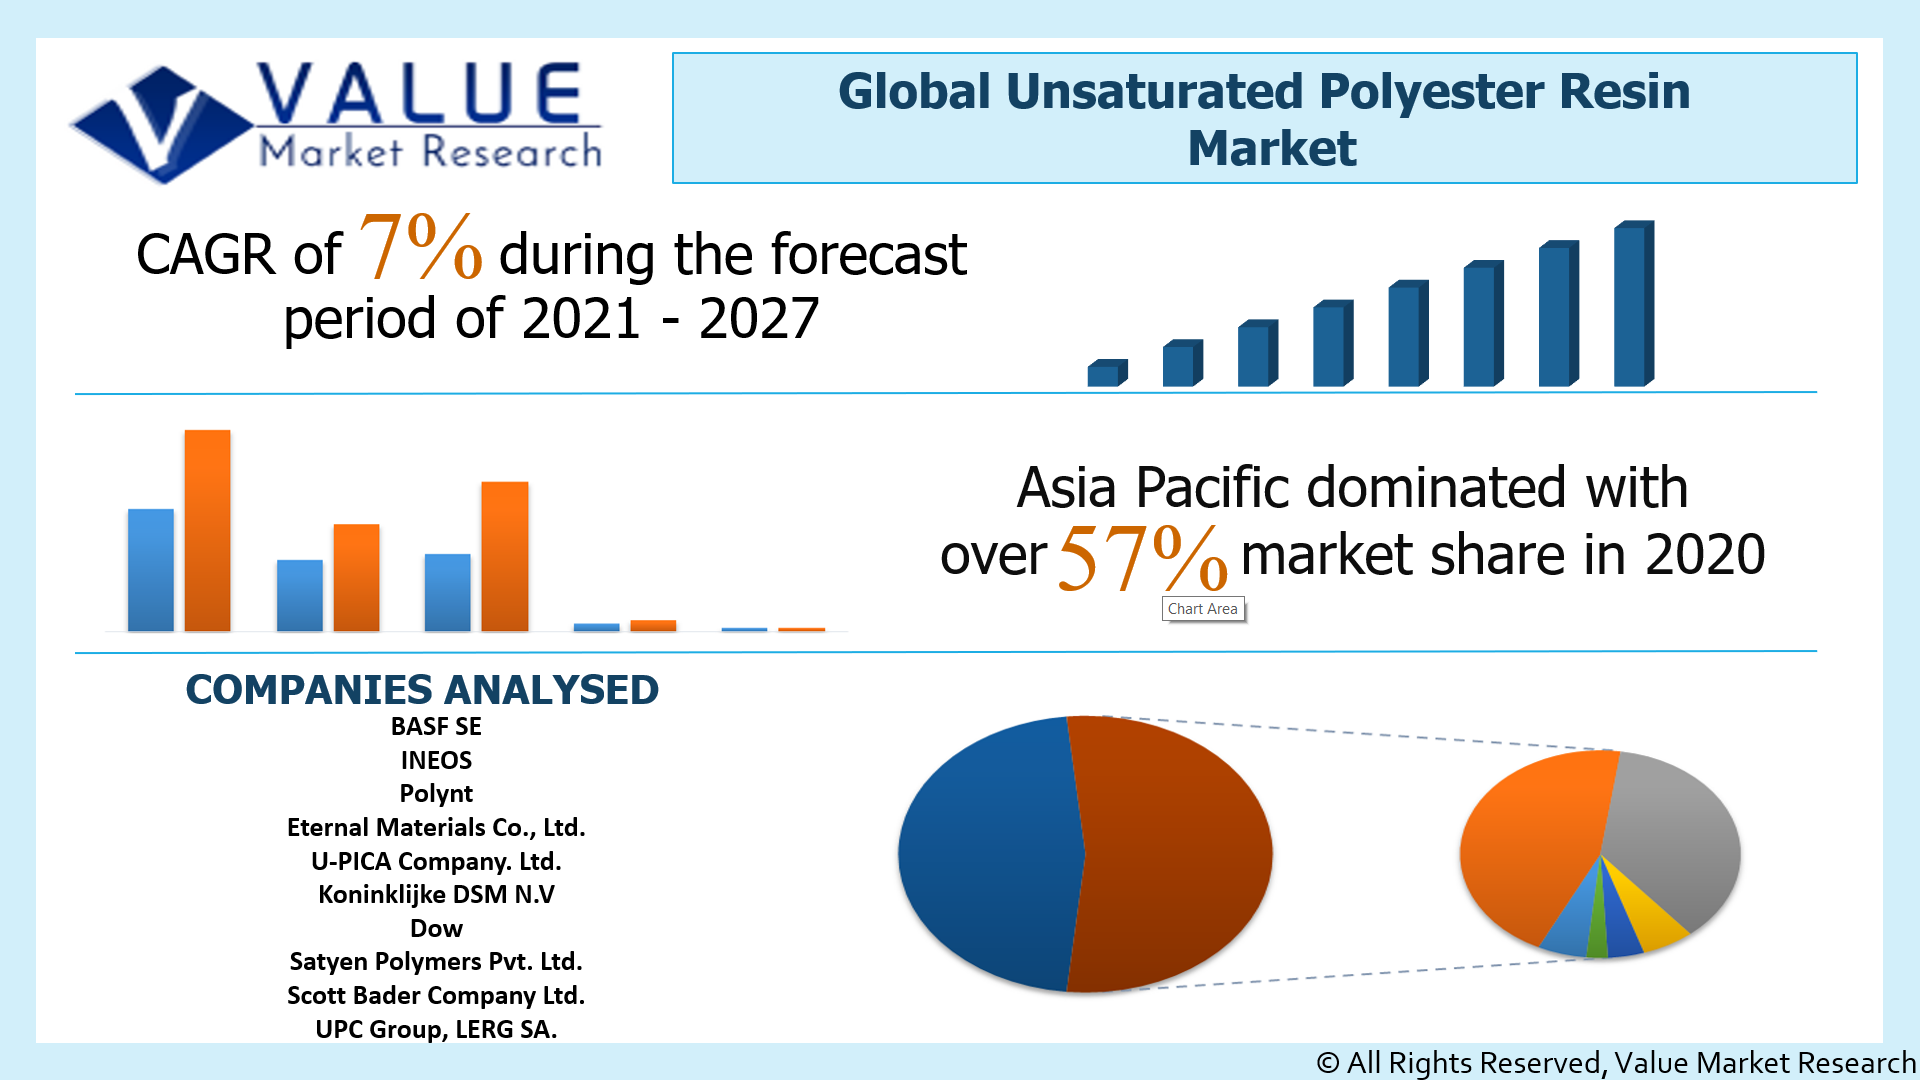 Global Unsaturated Polyester Resin Market